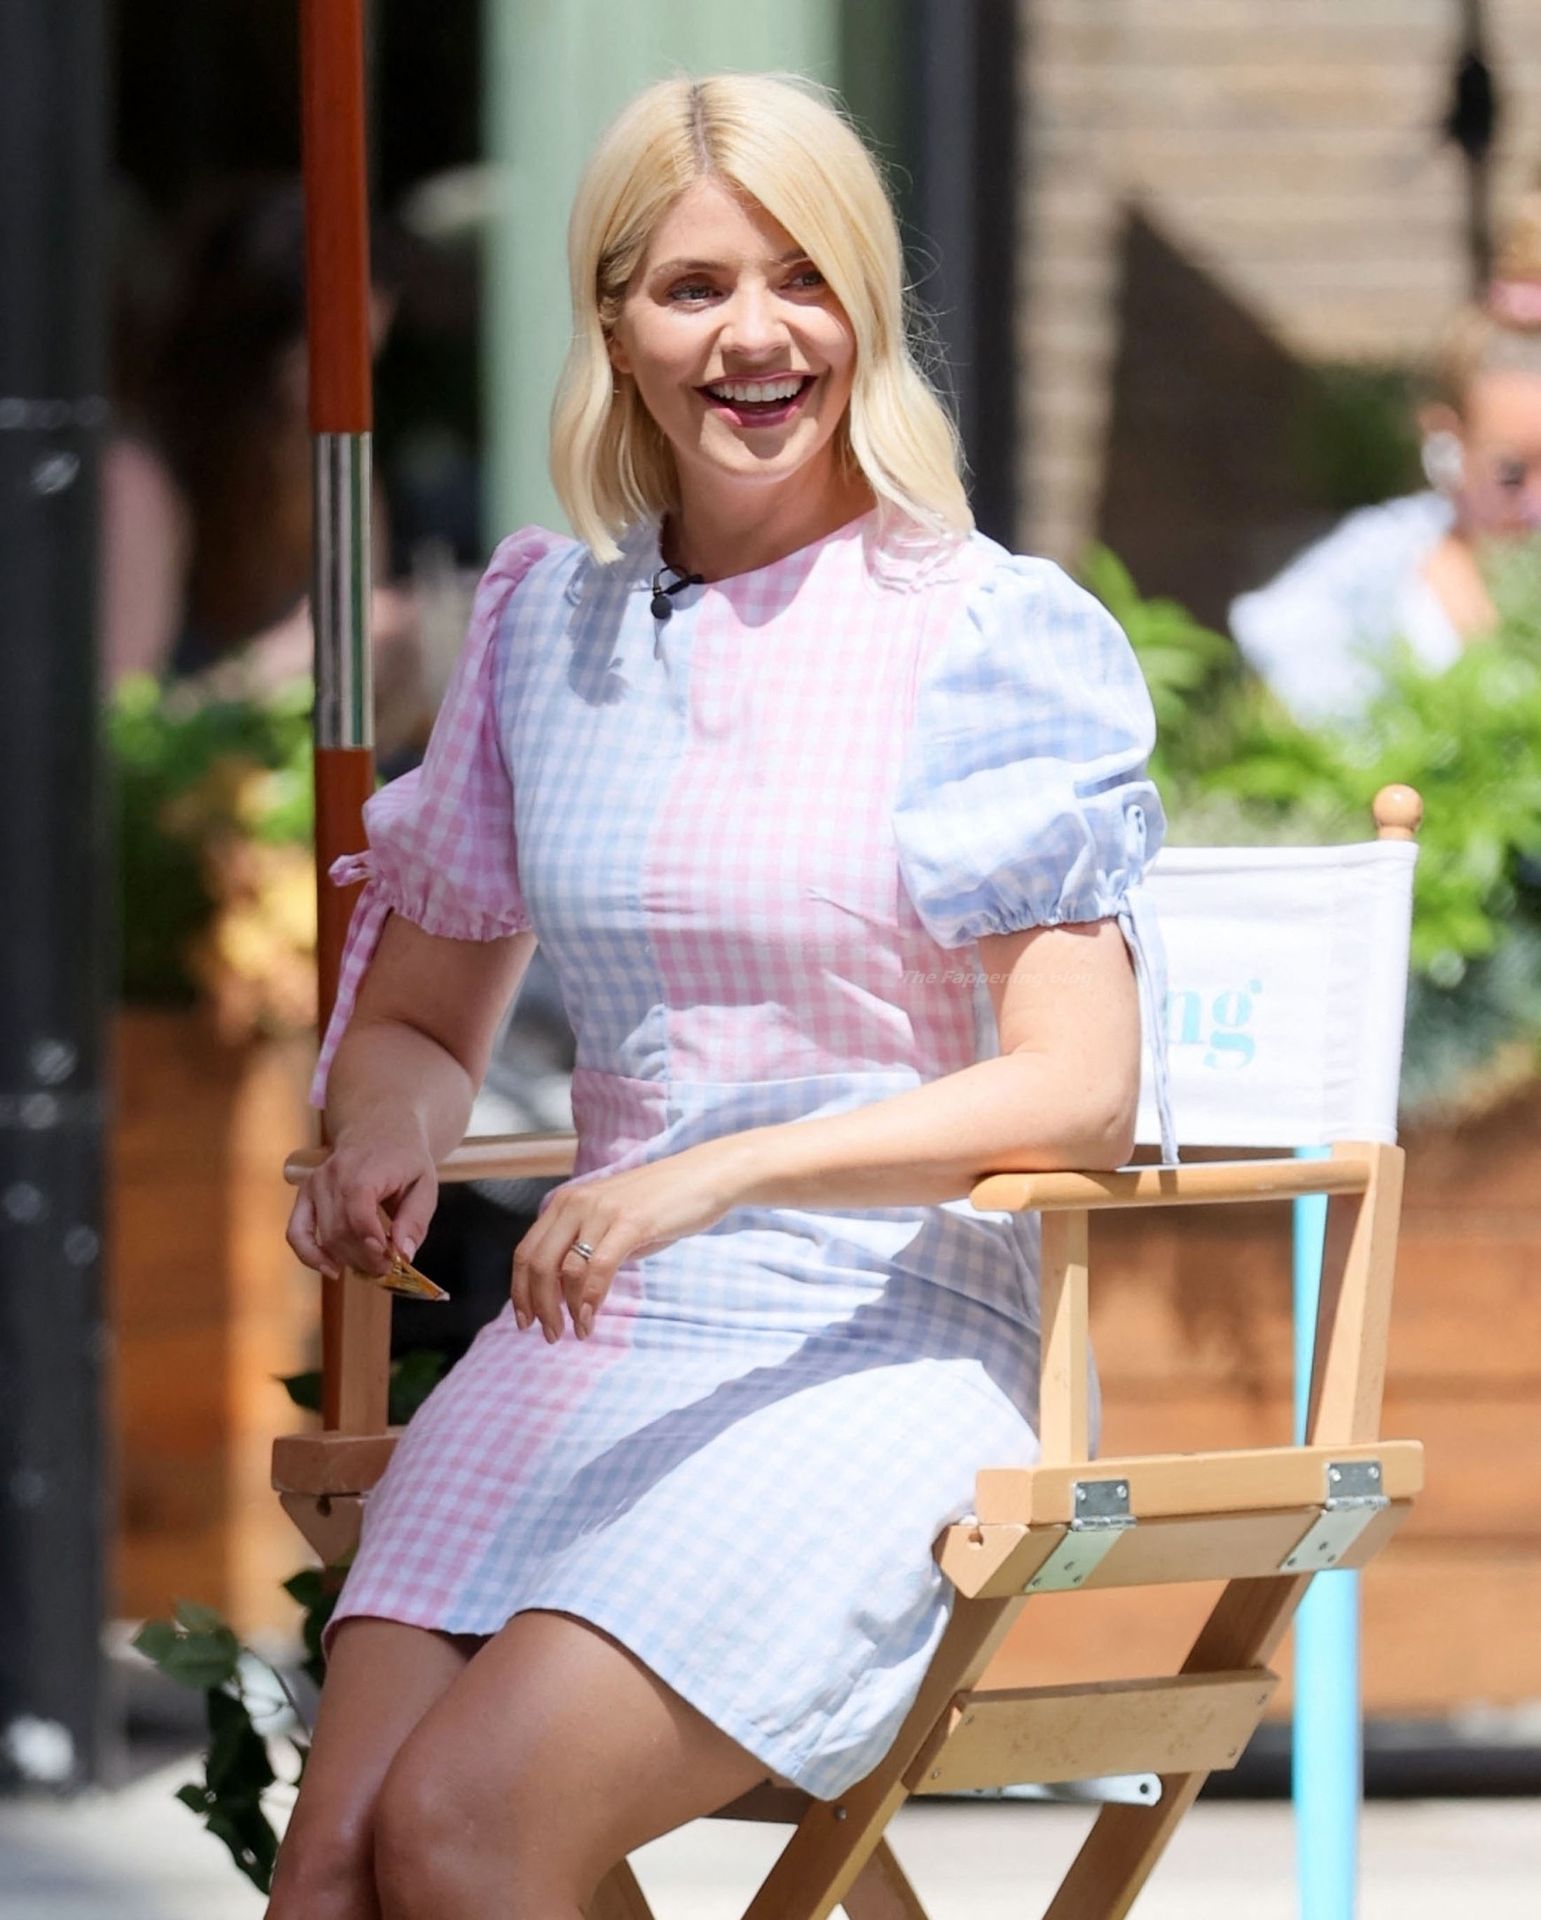 Holly Willoughby Enjoys a Segment on the Show This Morning’ in London (64 Photos)